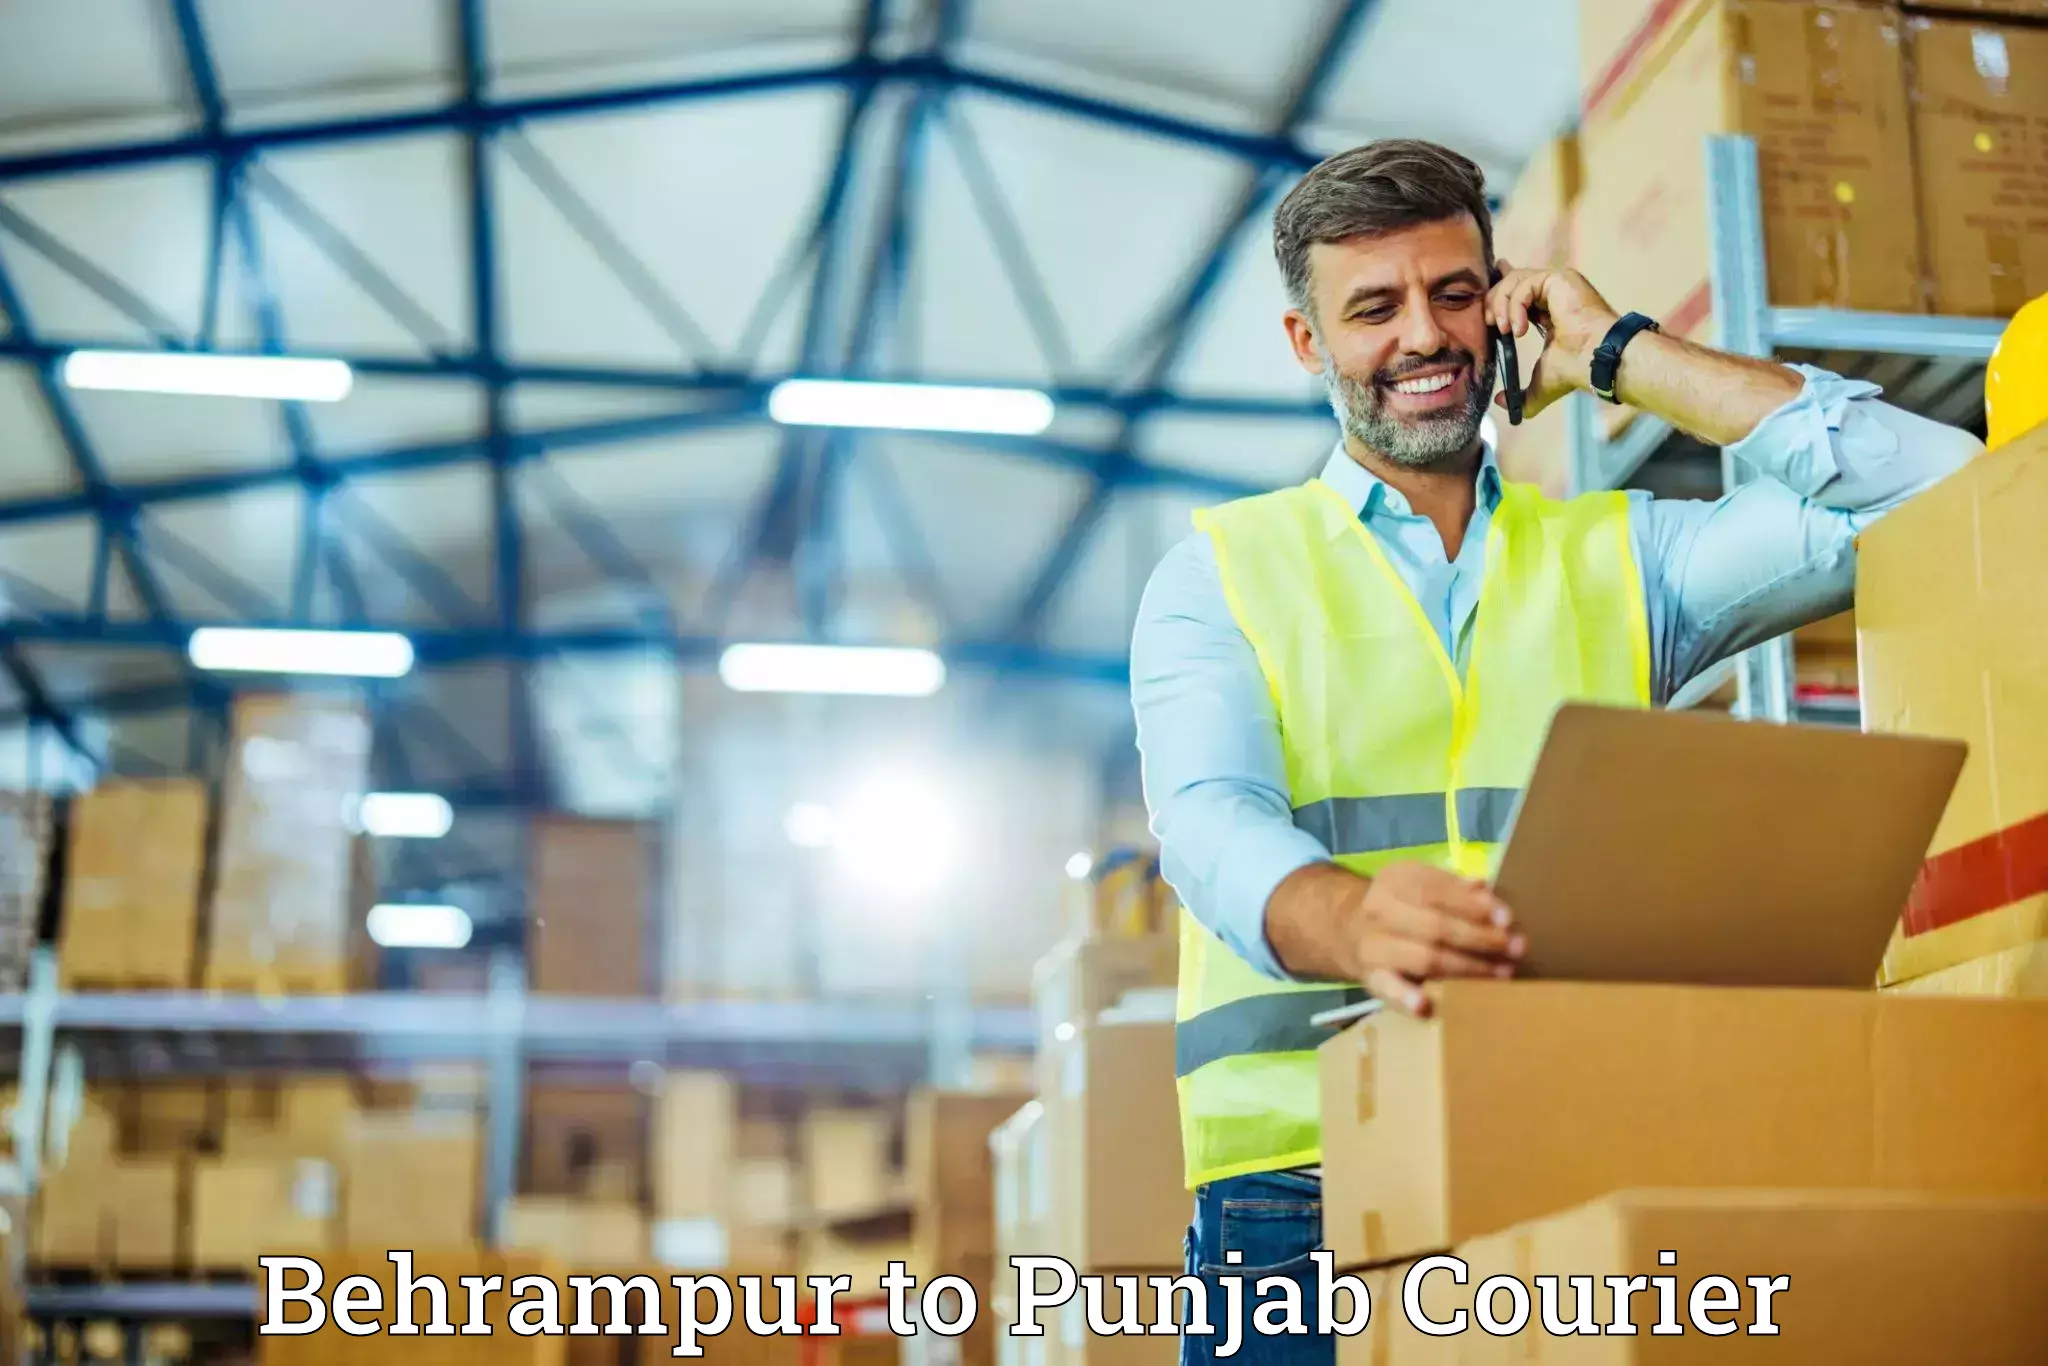 Furniture delivery service Behrampur to Pathankot